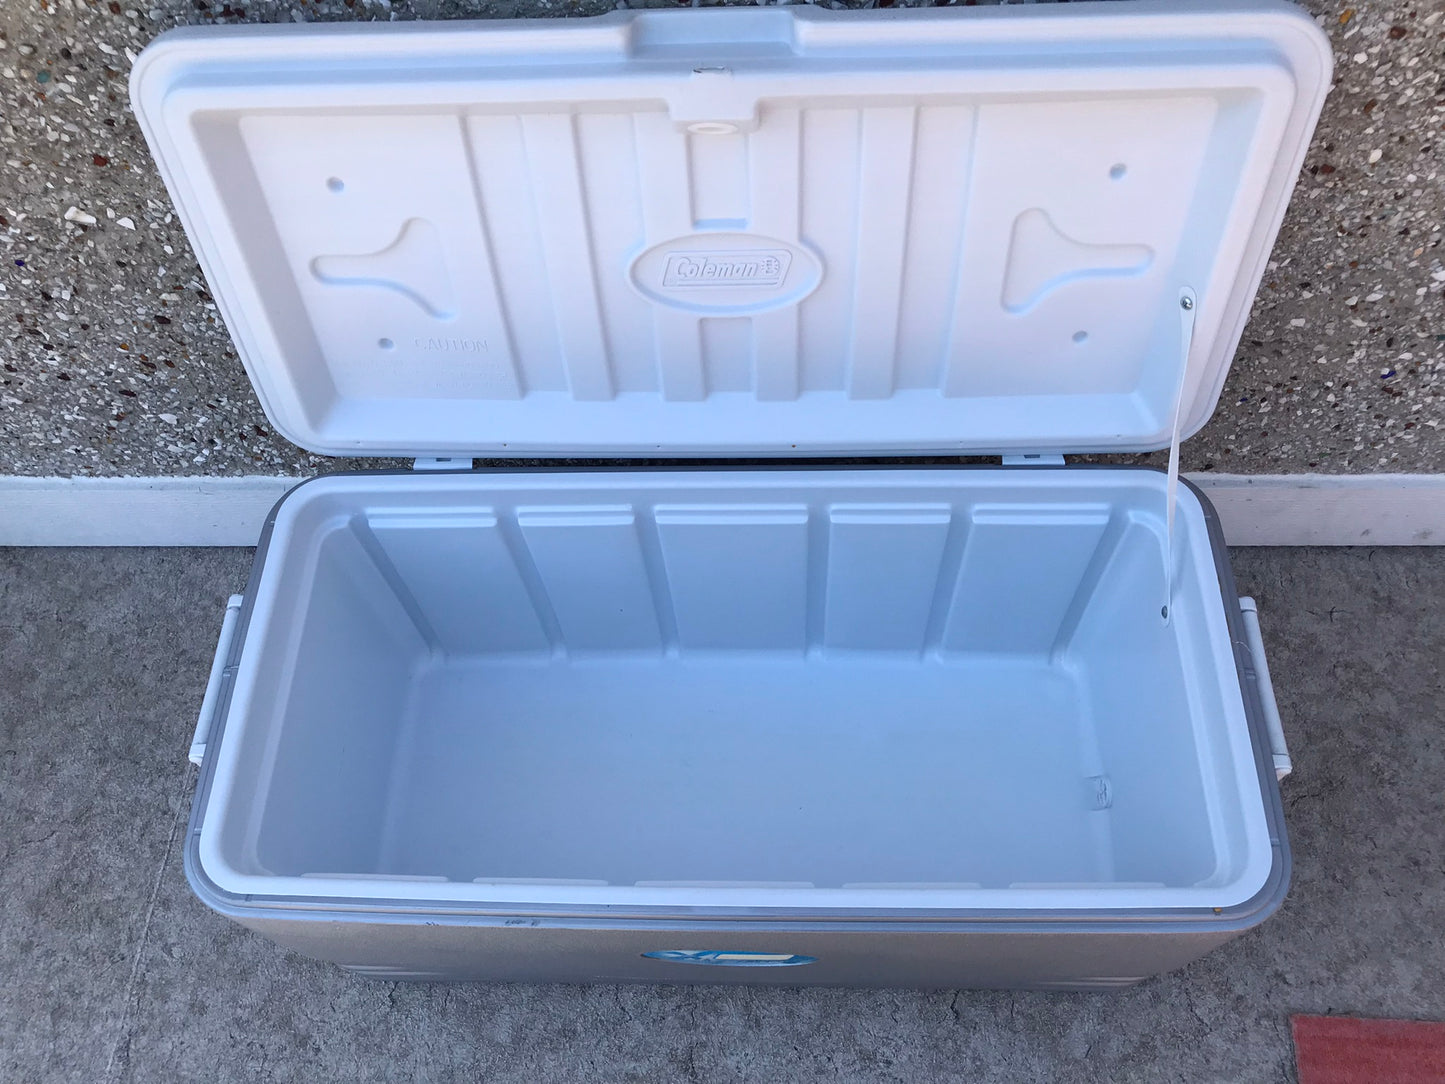 Camping Fishing Coleman Xtream 100 quart X Large Cooler With Spout Like New White Grey